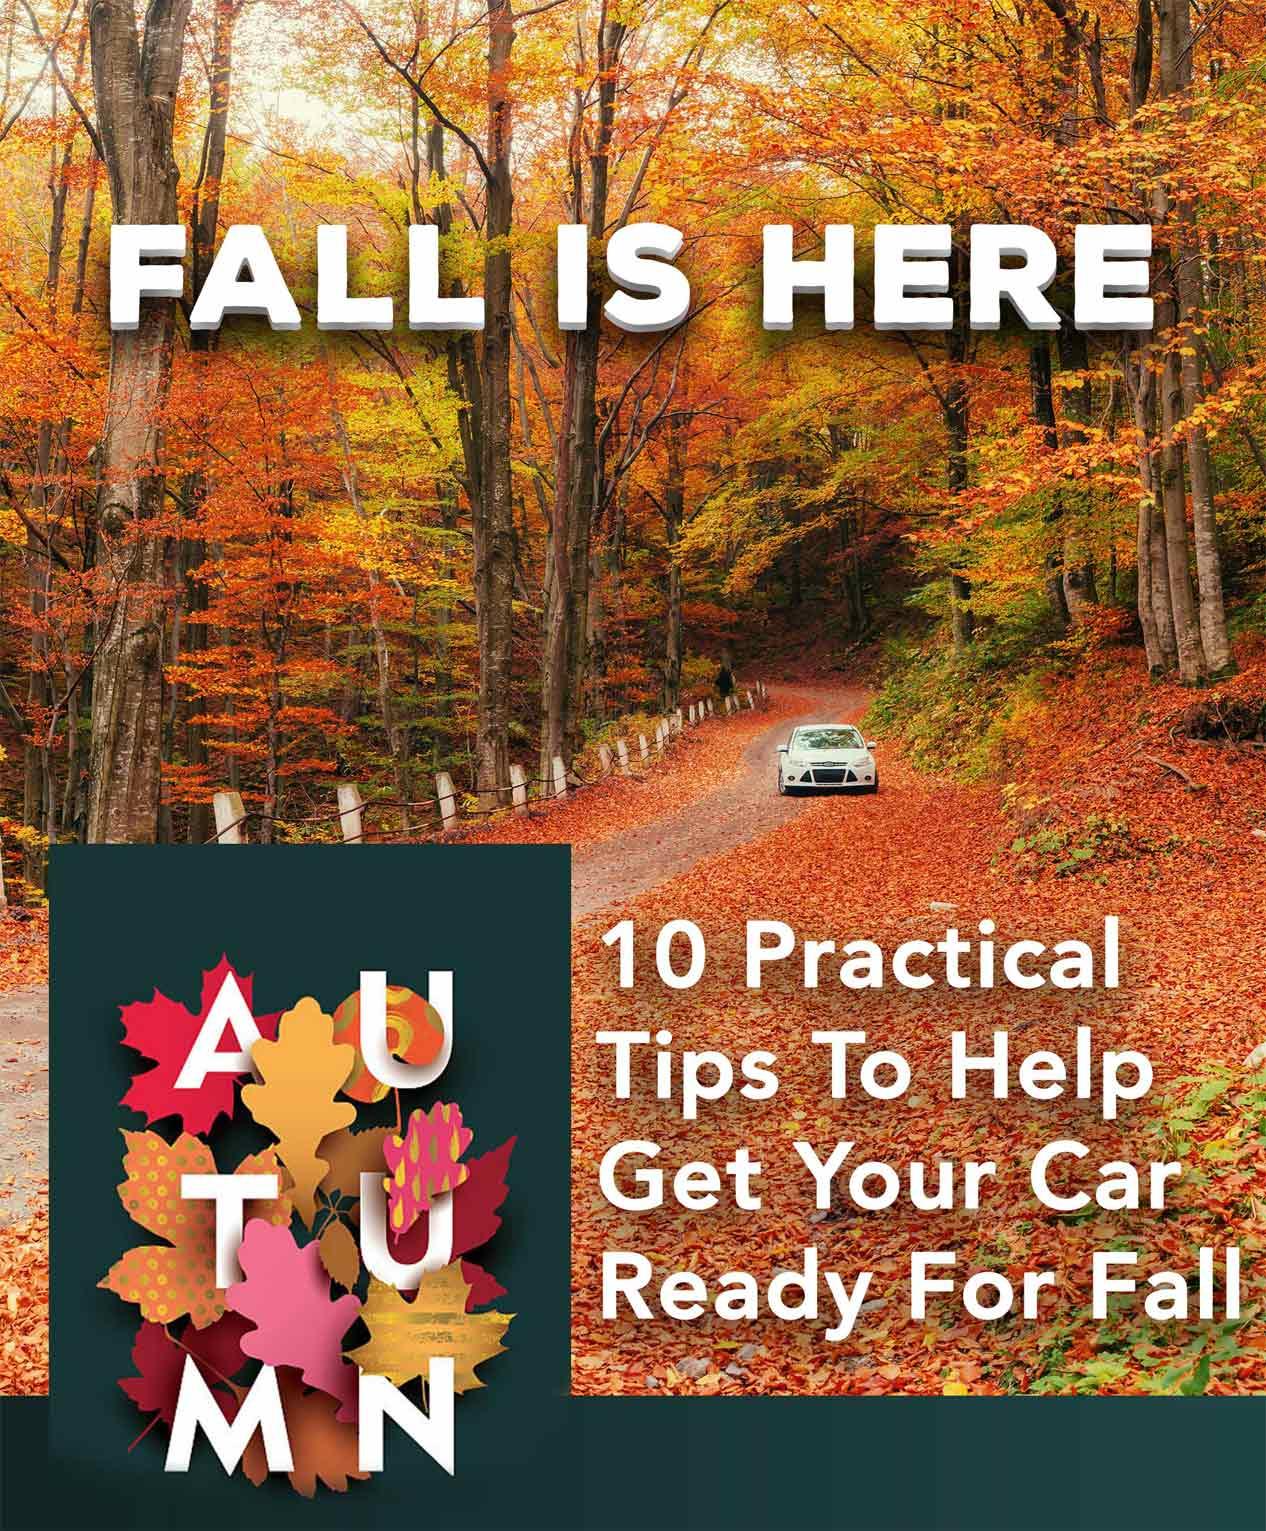 10 Practical Tips To Help Get Your Car Ready For Fall